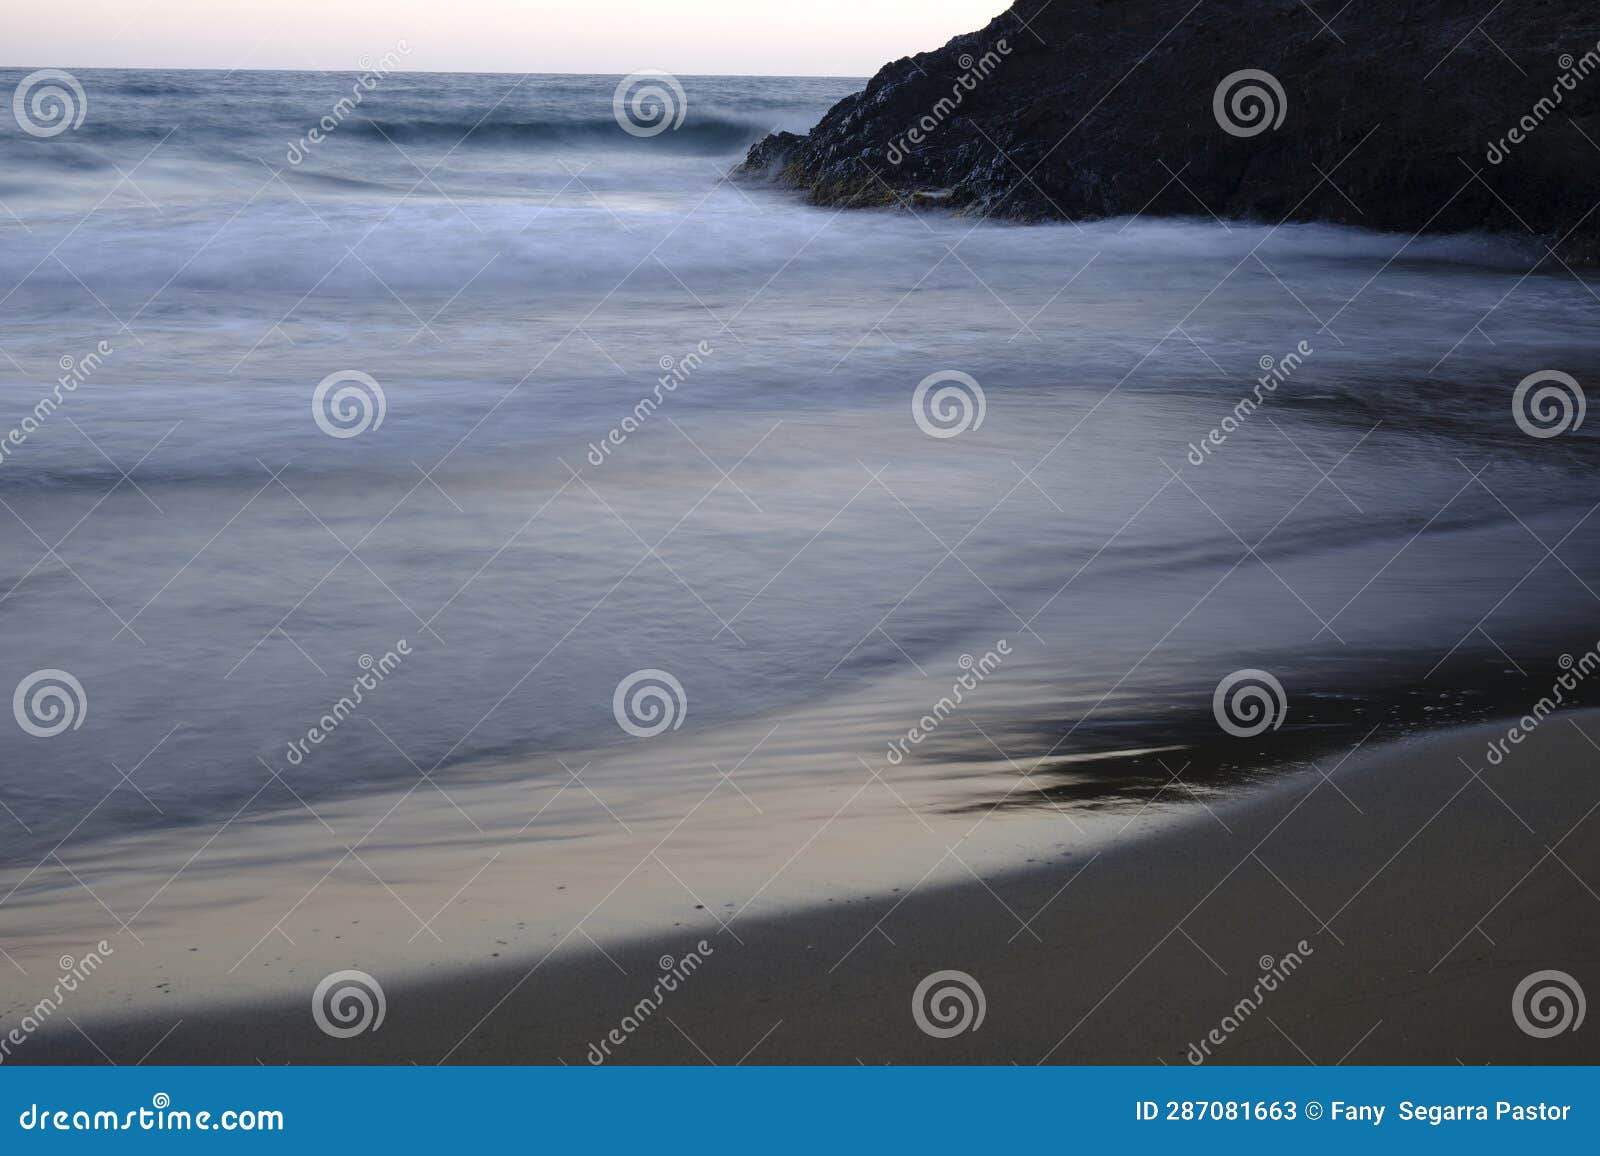 the waves calmly approach the shore of the beach,